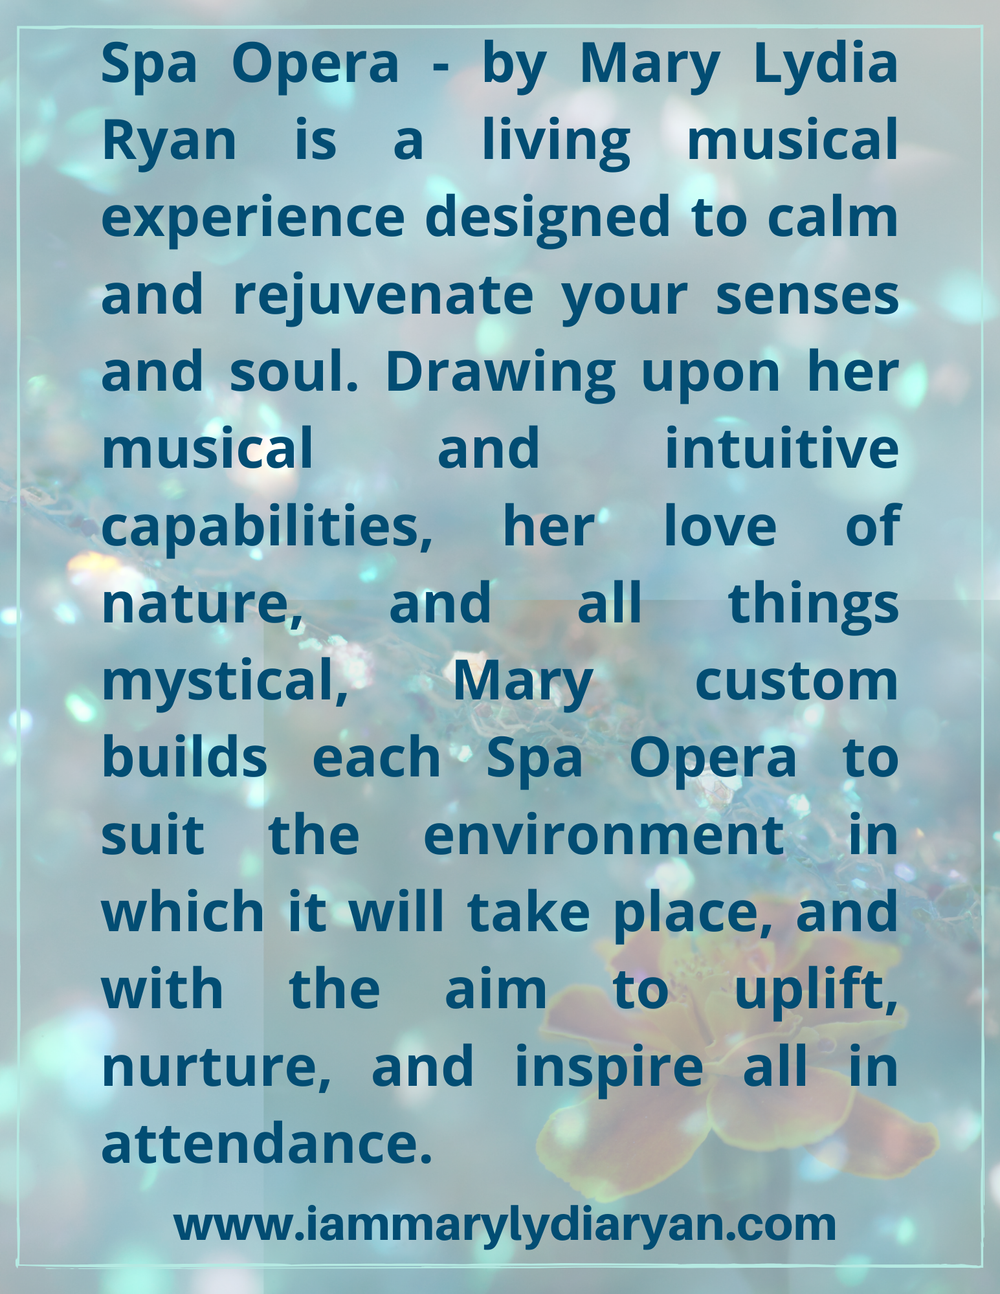 Click on image to contact Mary for a custom group Spa Opera experience